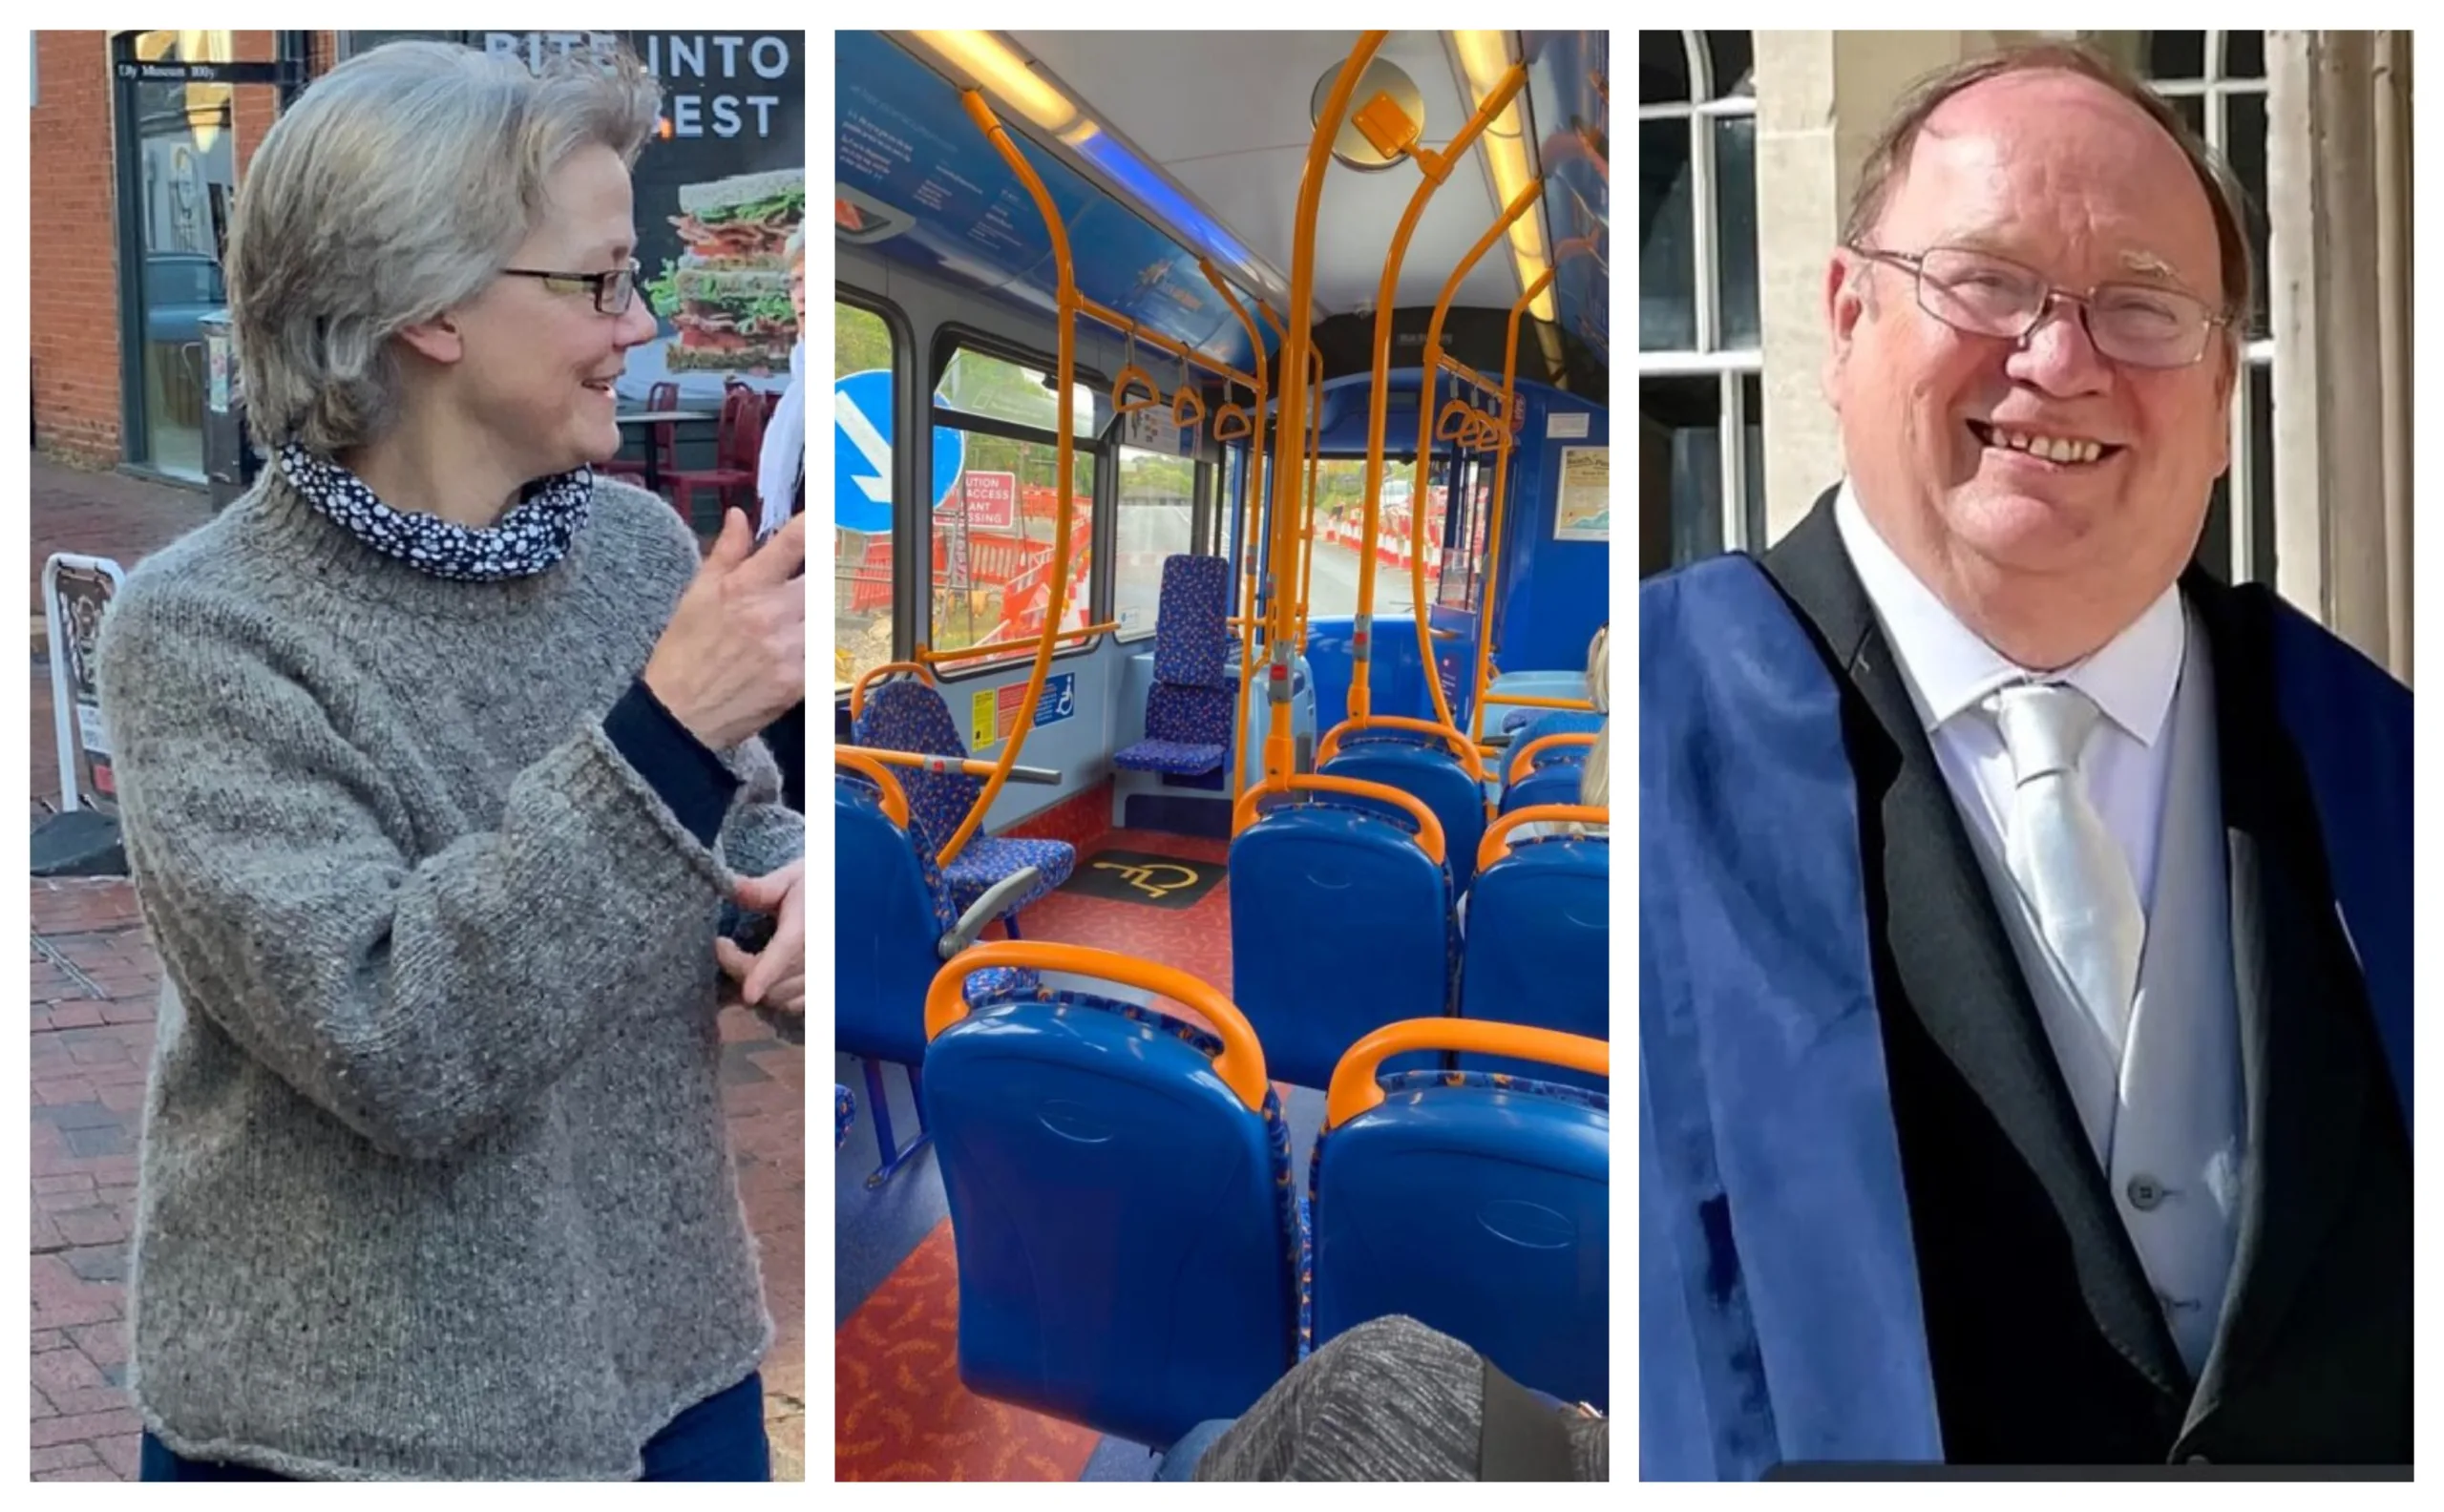 Cllr Anna Bailey and Cllr Chris Boden – who proposed an amendment that would have scuppered mayoralty precept. They produced a ‘hit list’ of 10 Stagecoach services that they felt were costing too much to subsidise.